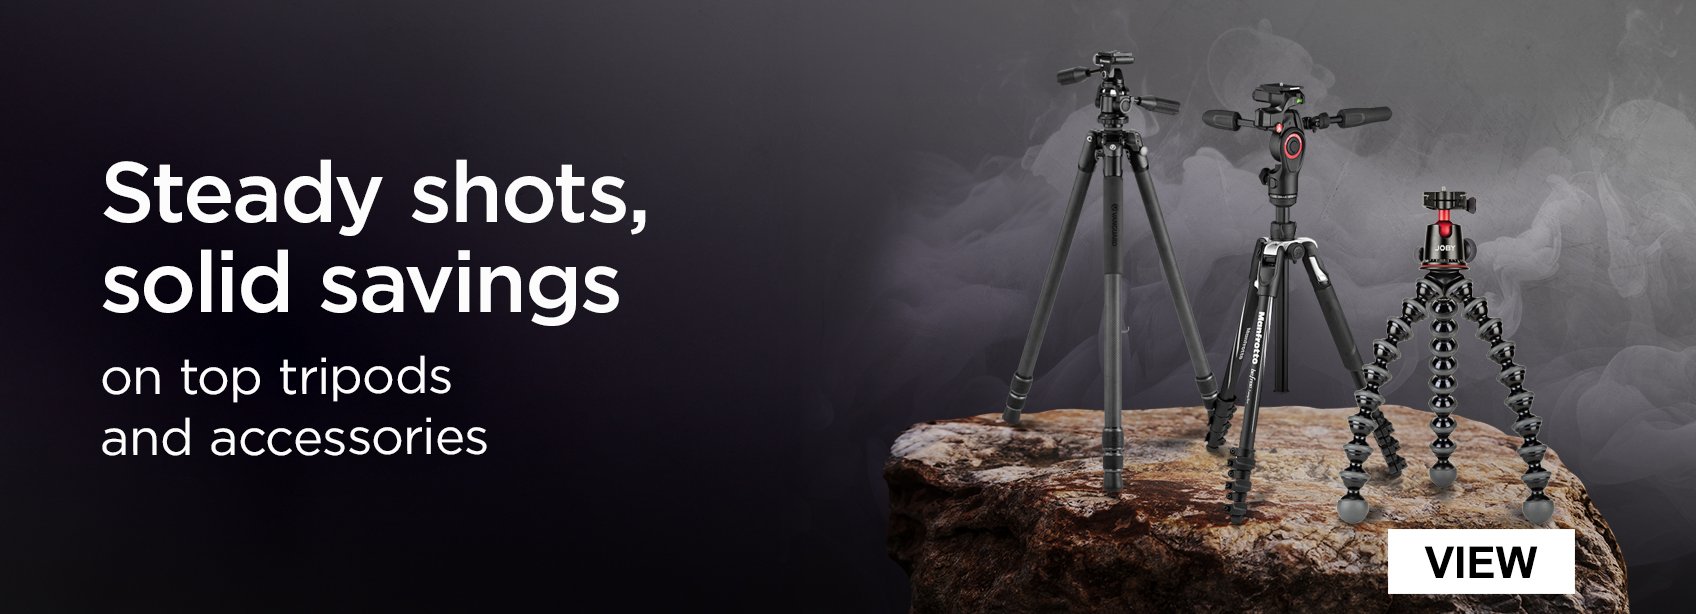 Steady Shots, Solid Savings on top tripods and accessories